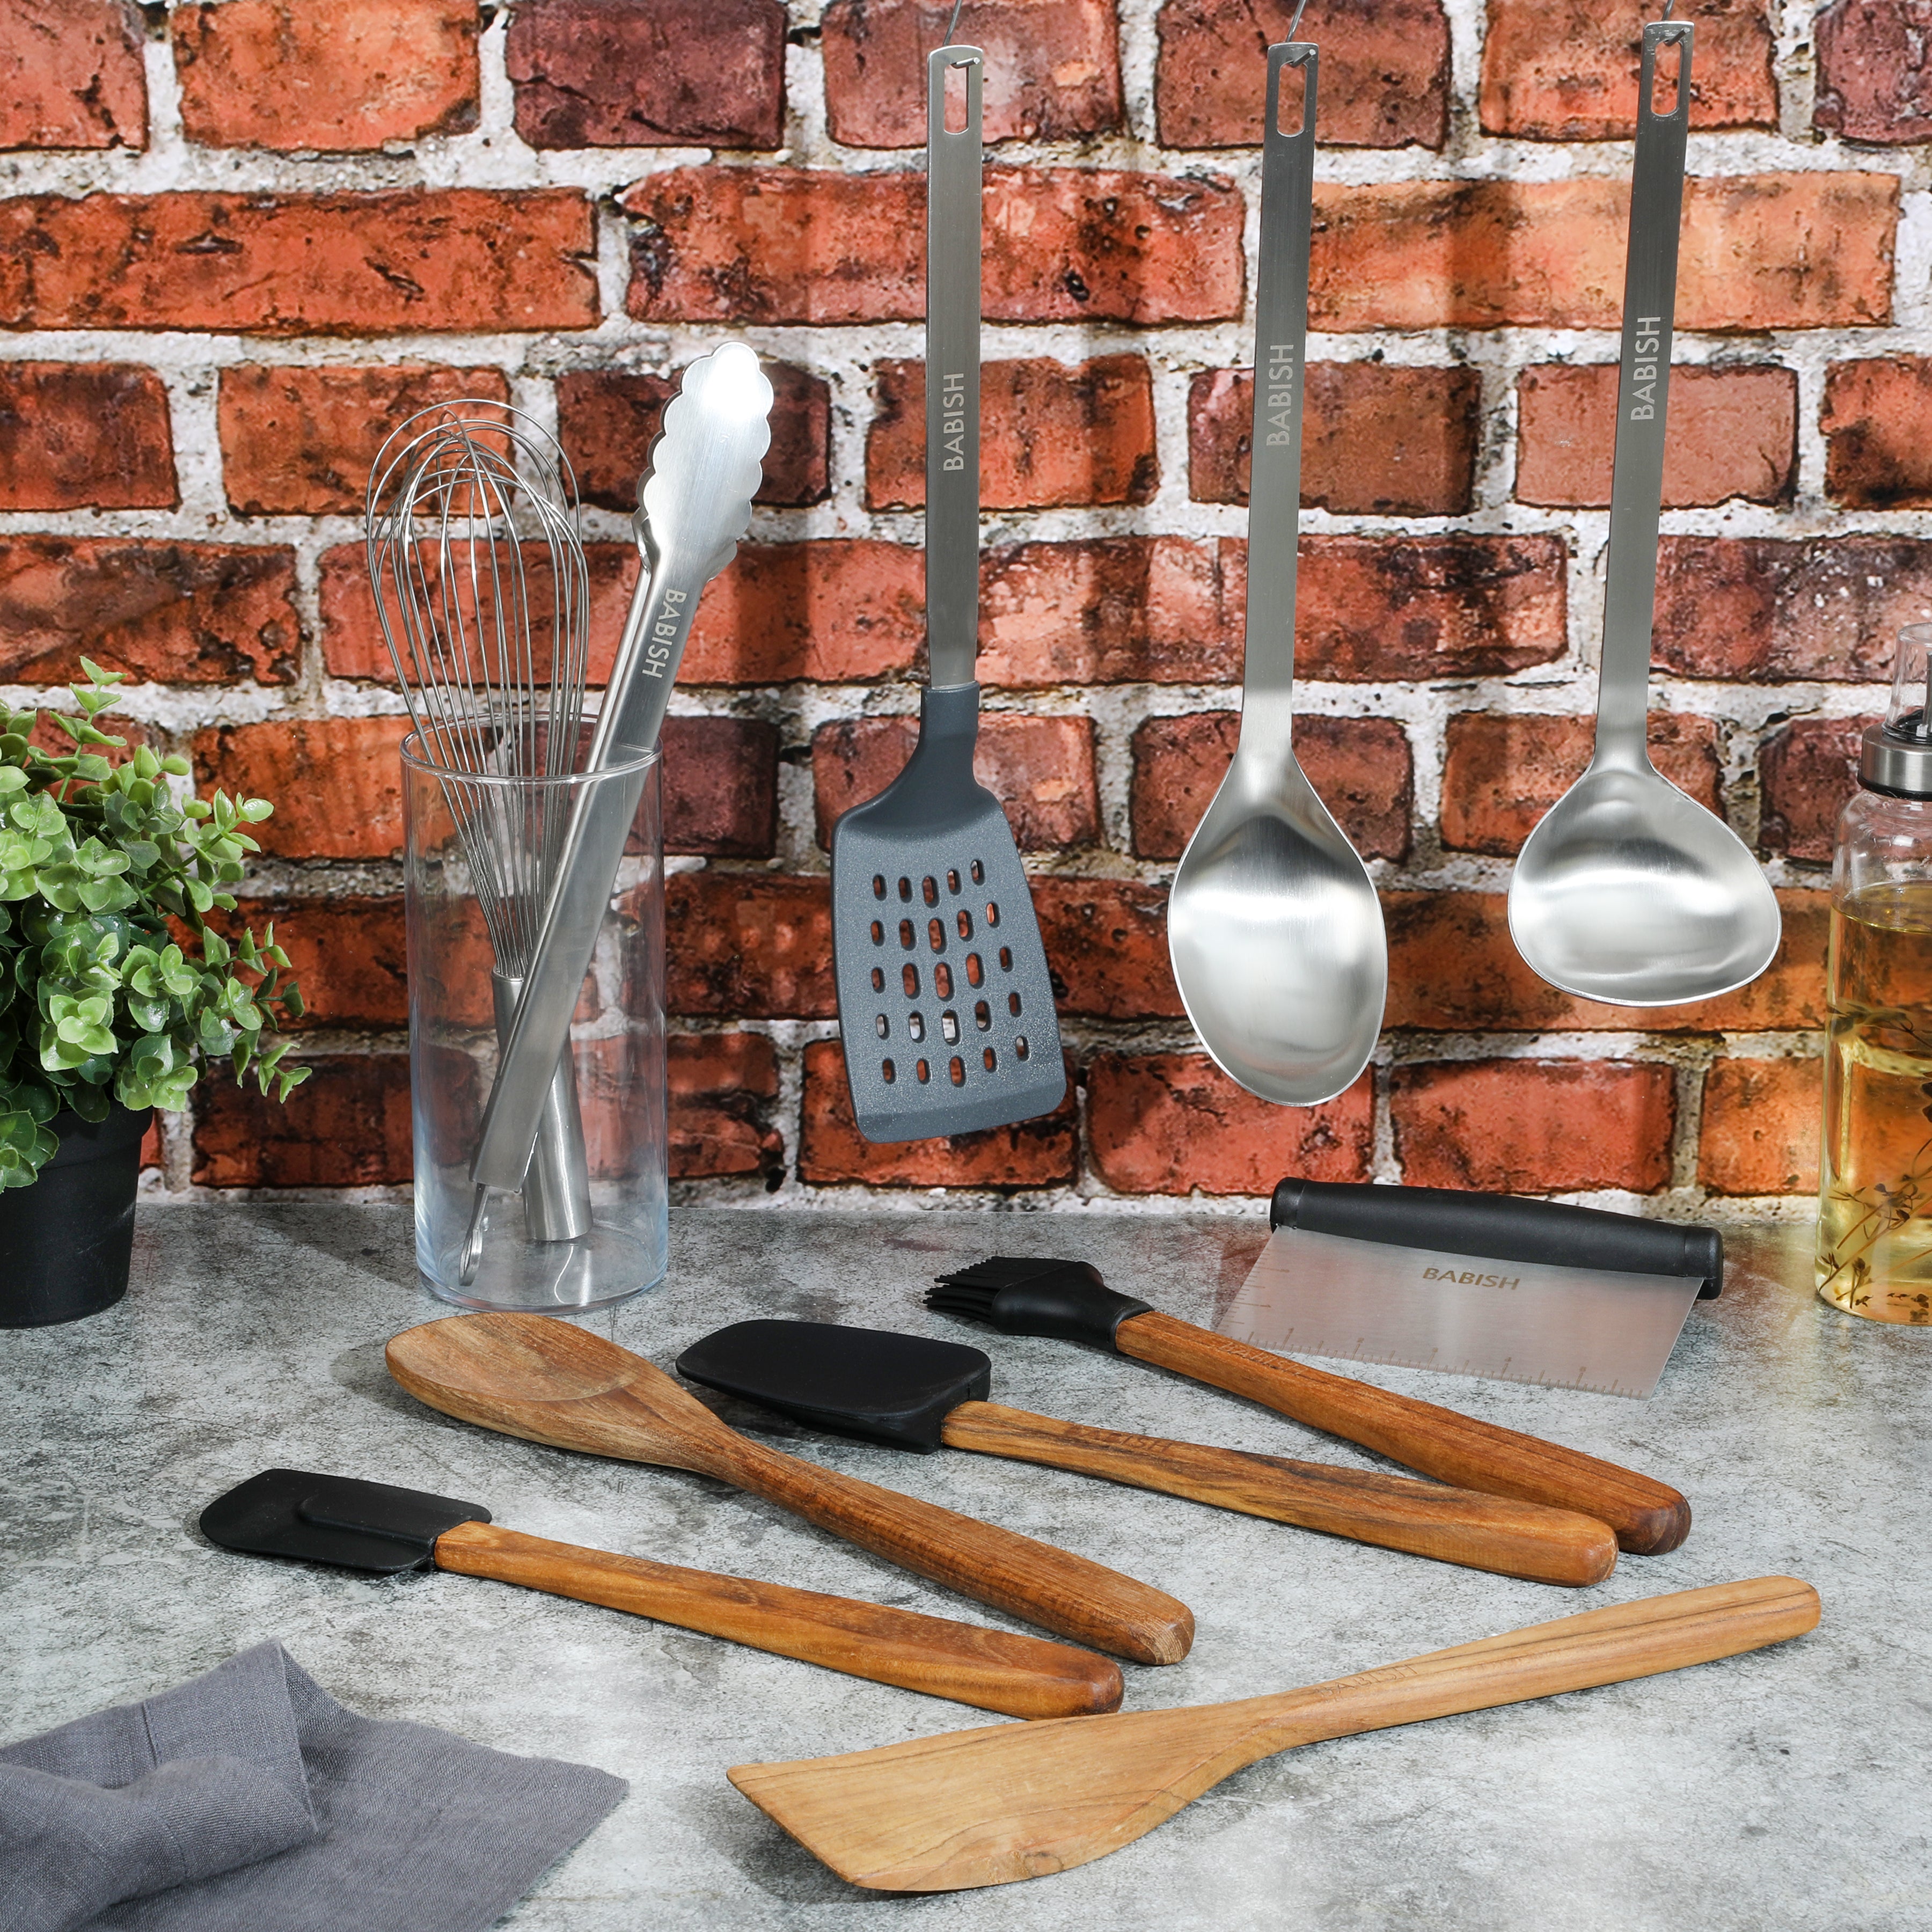 Babish 11 Piece Essential Wood, Silicone, and Stainless Steel Tool Set